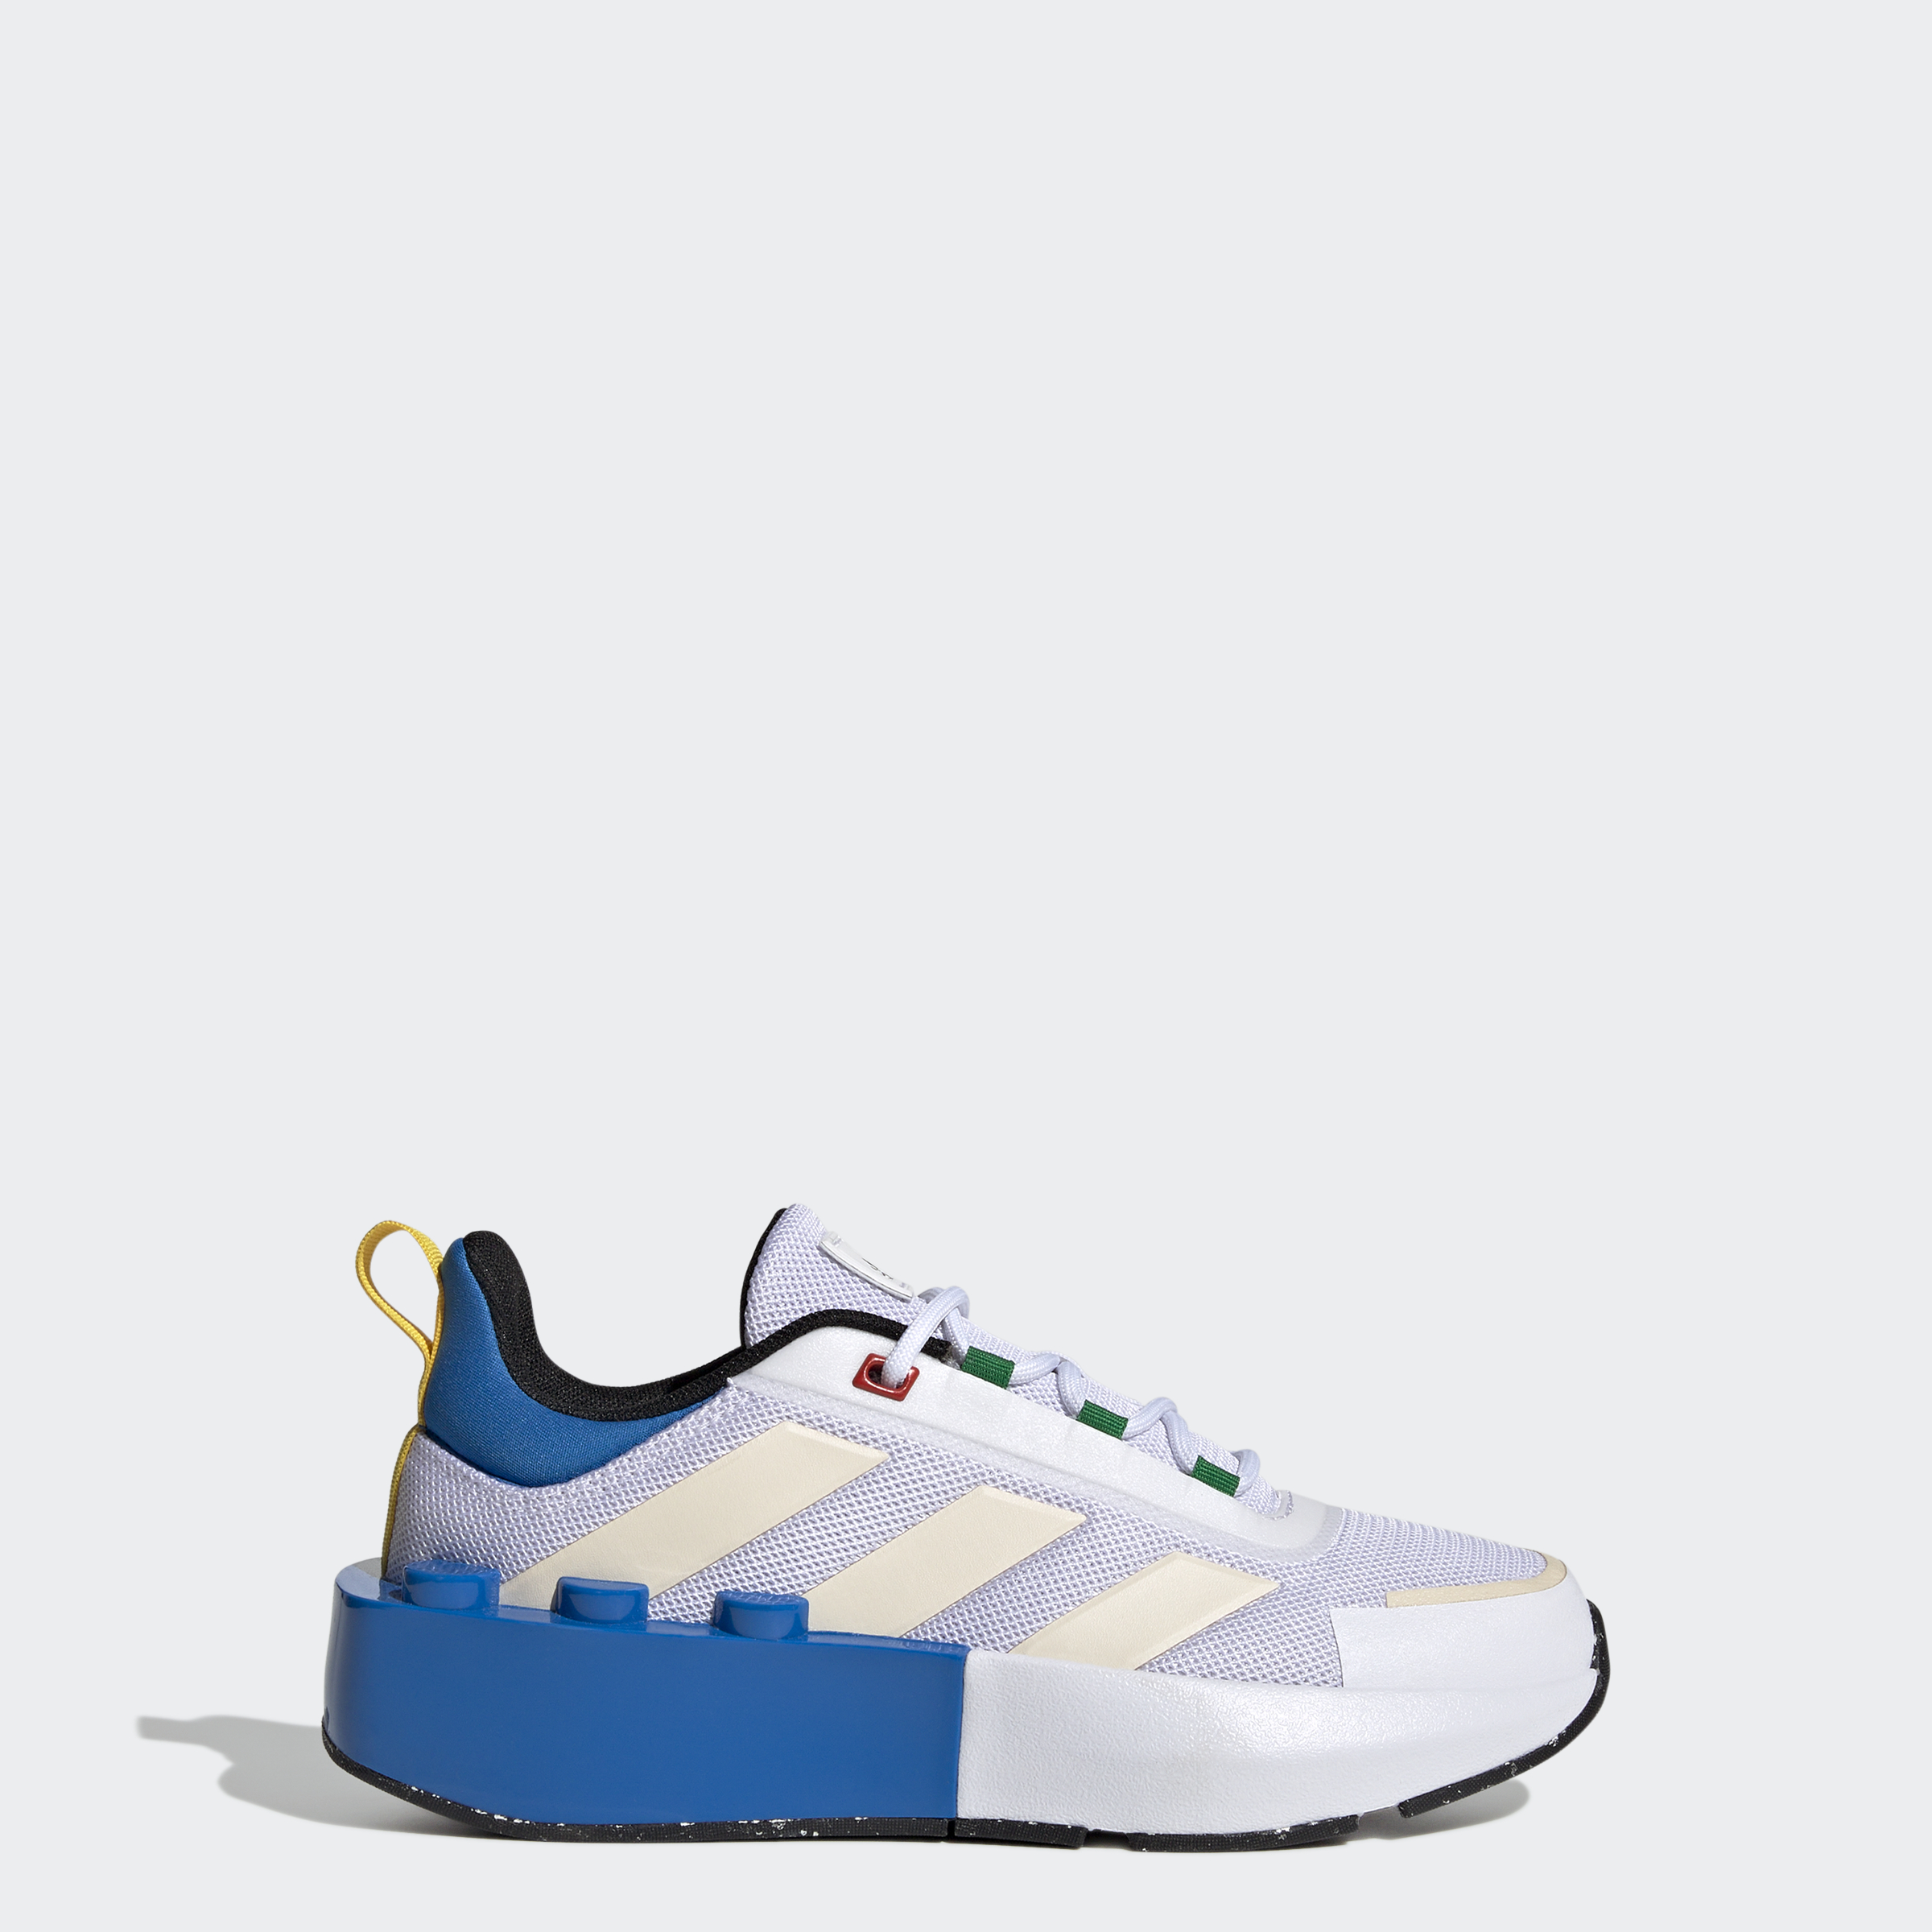 Lego has created an Adidas sneaker, complete with laces and a